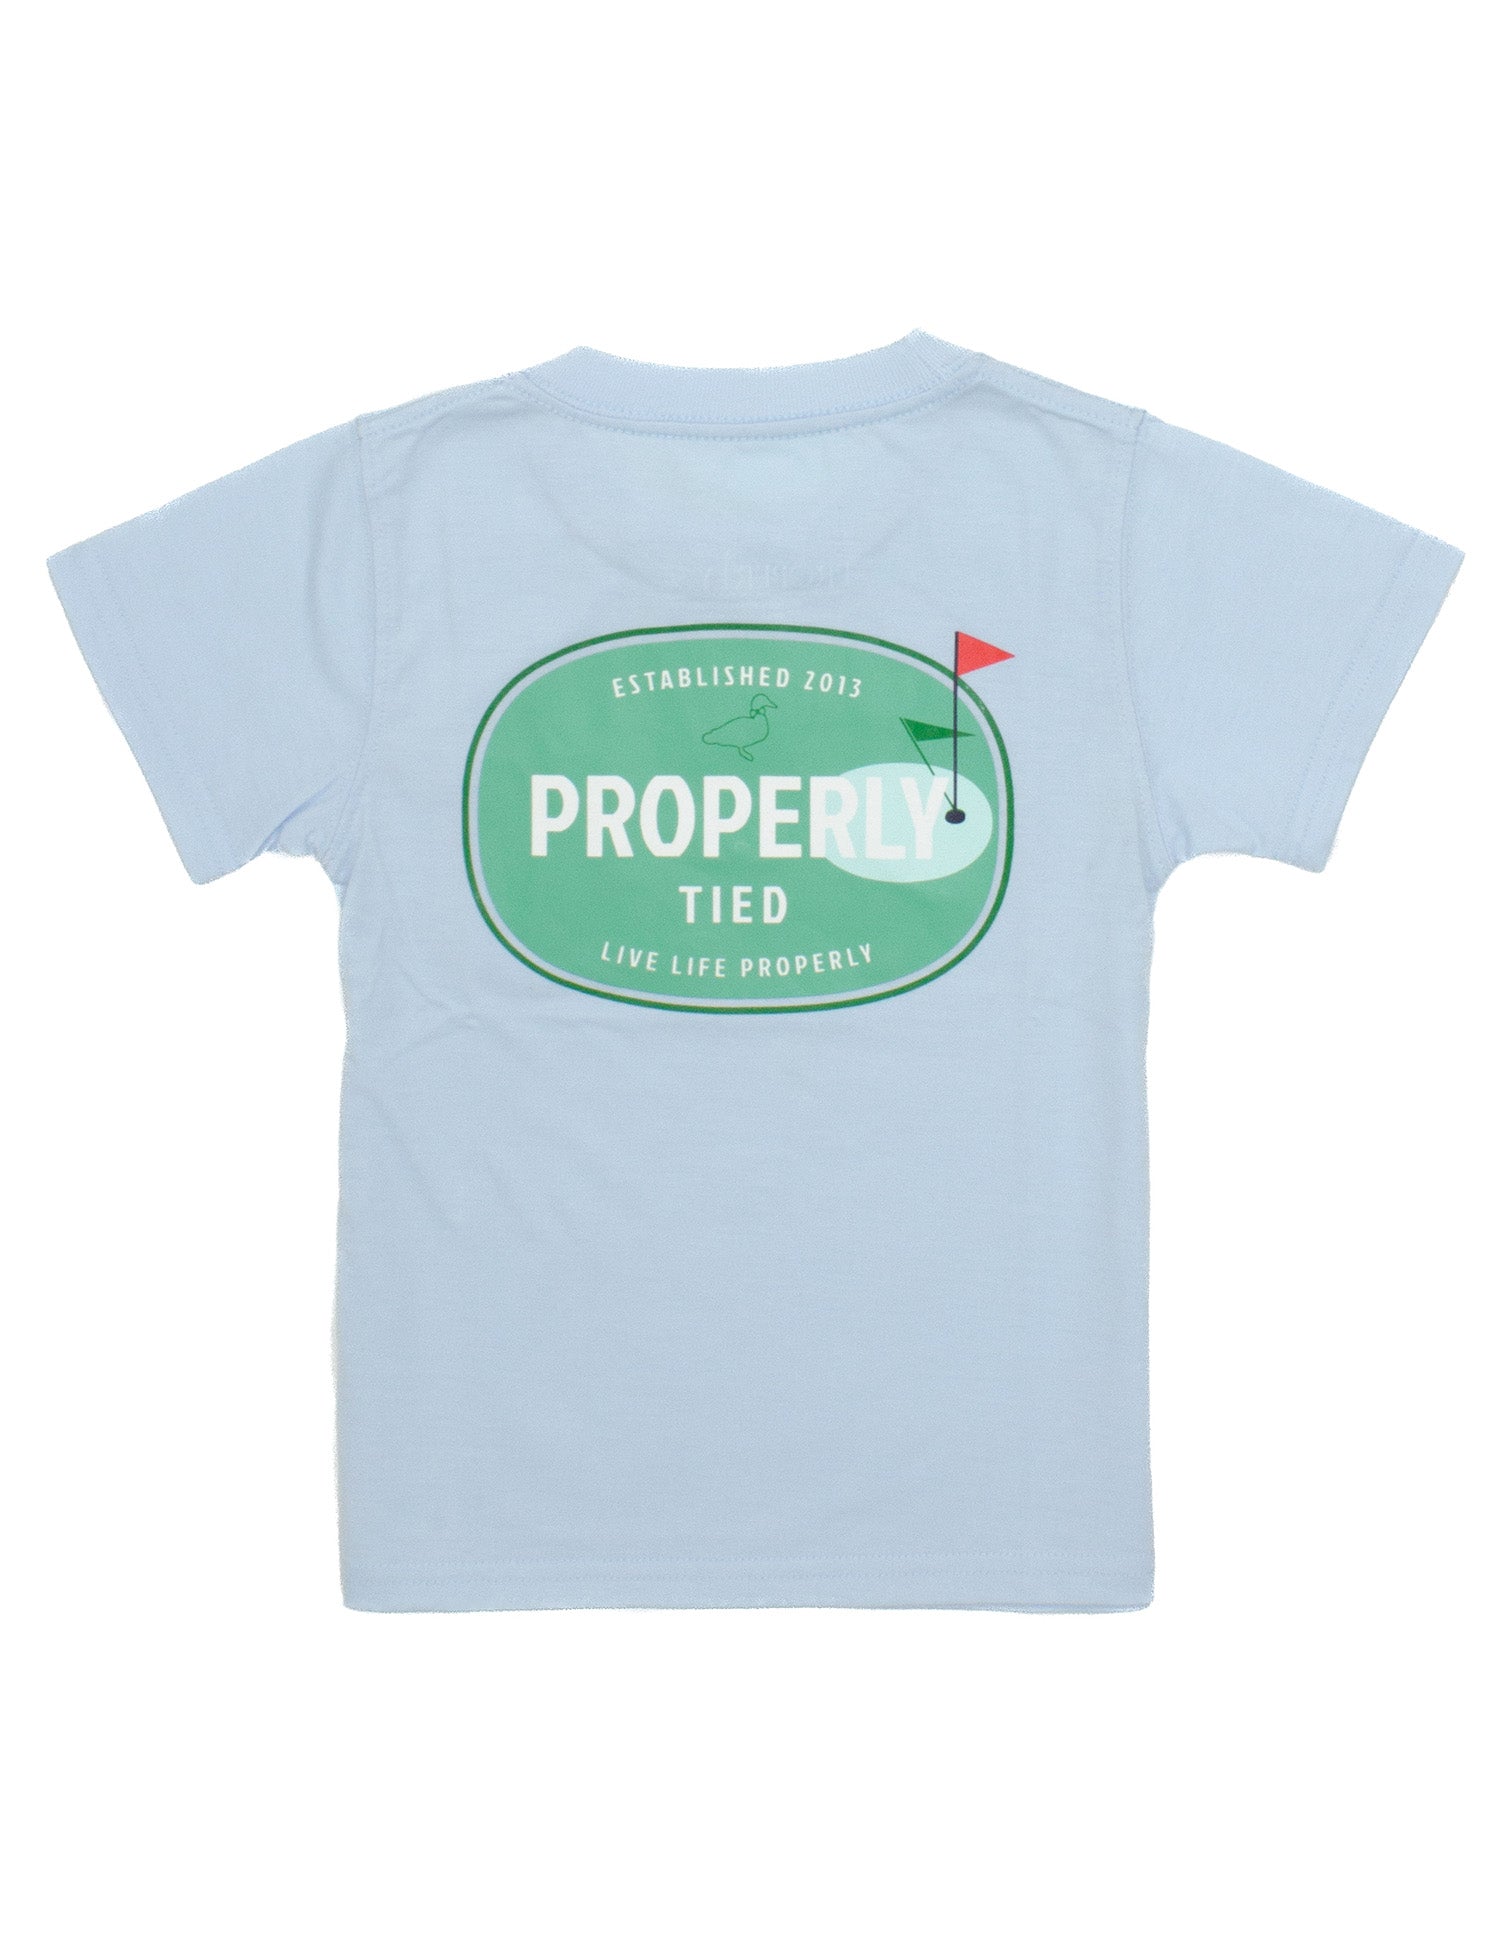 Properly Tied: The Links SS Tee